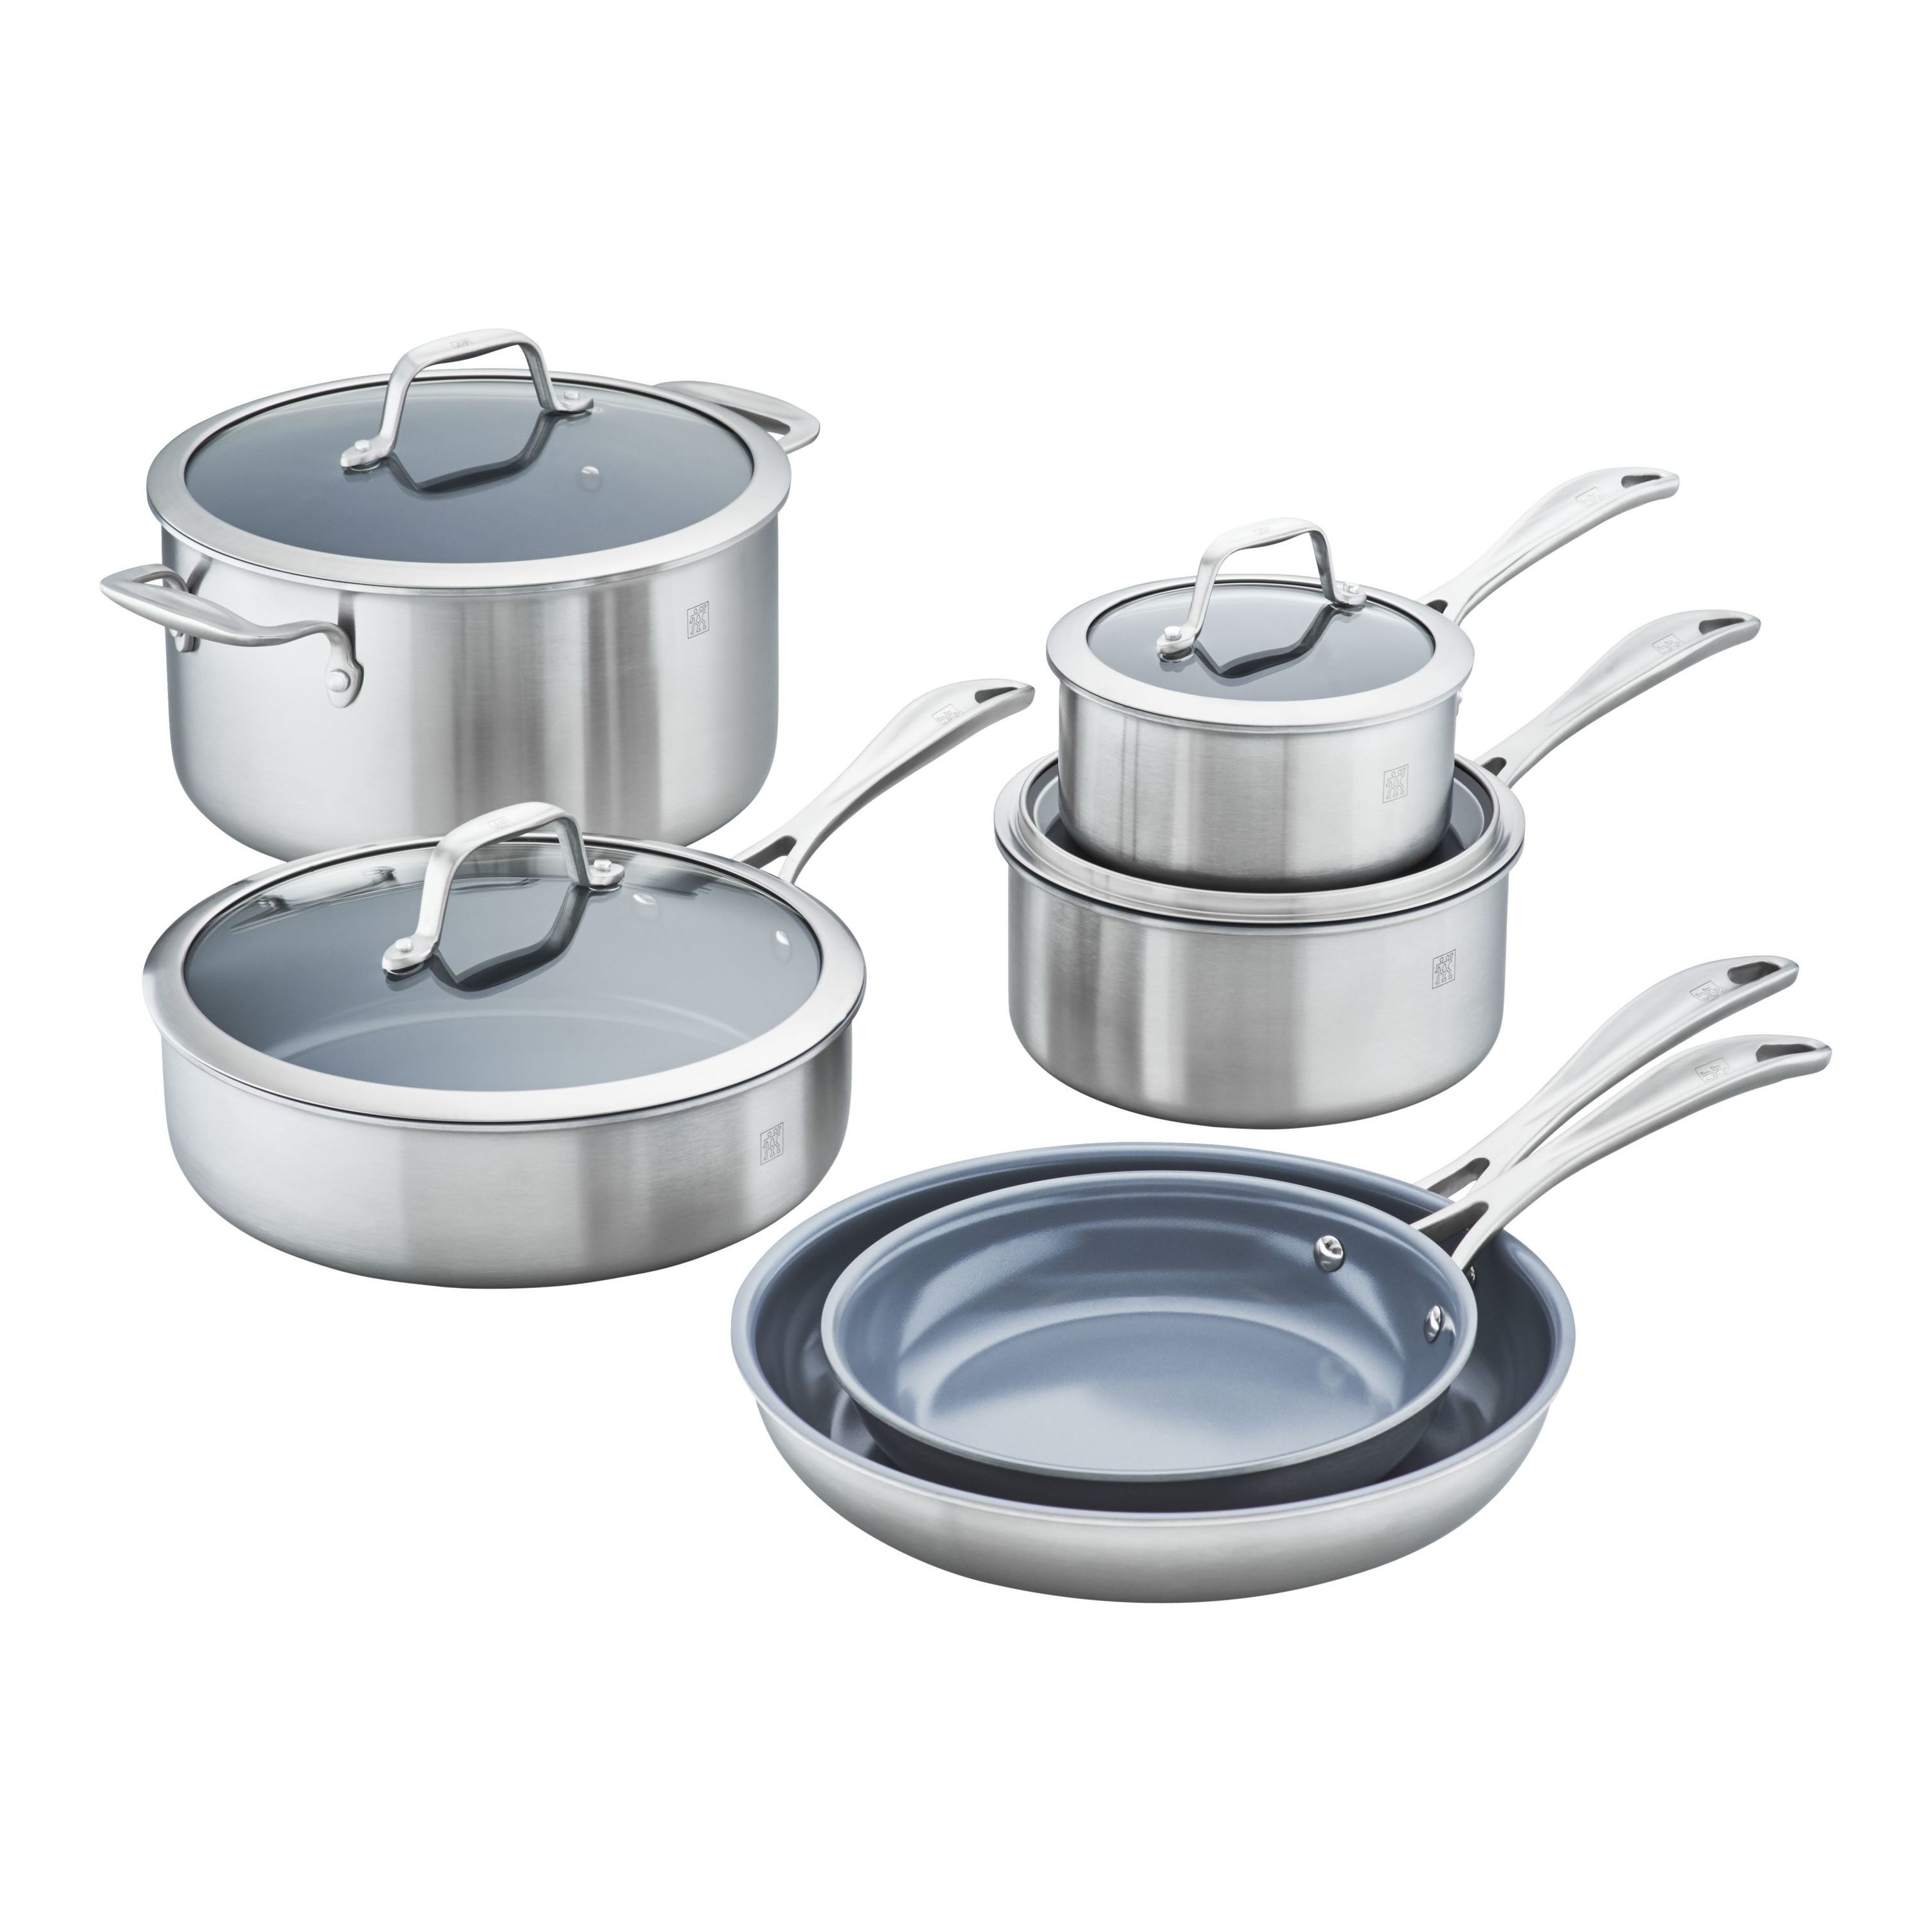 10 Pieces Cookware Set Stainless Steel Kitchen Tools Quality Pots Pans Bowls Lid 